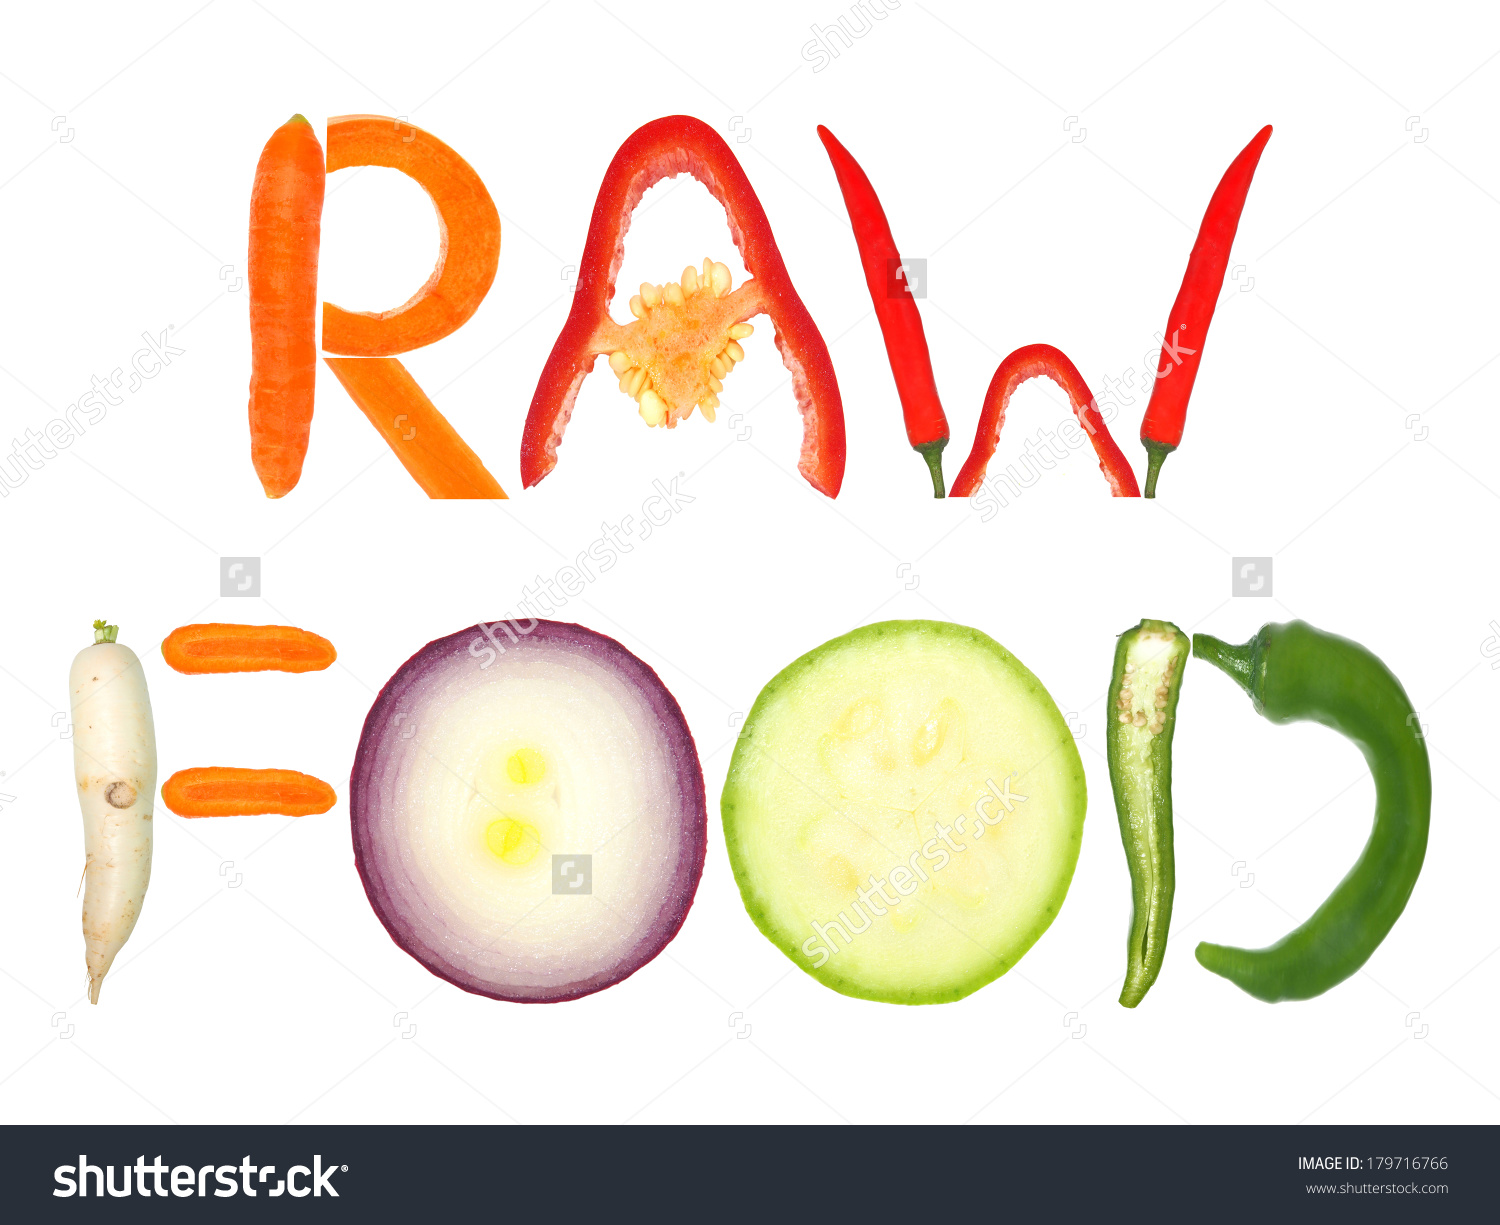 raw meat clipart - photo #17